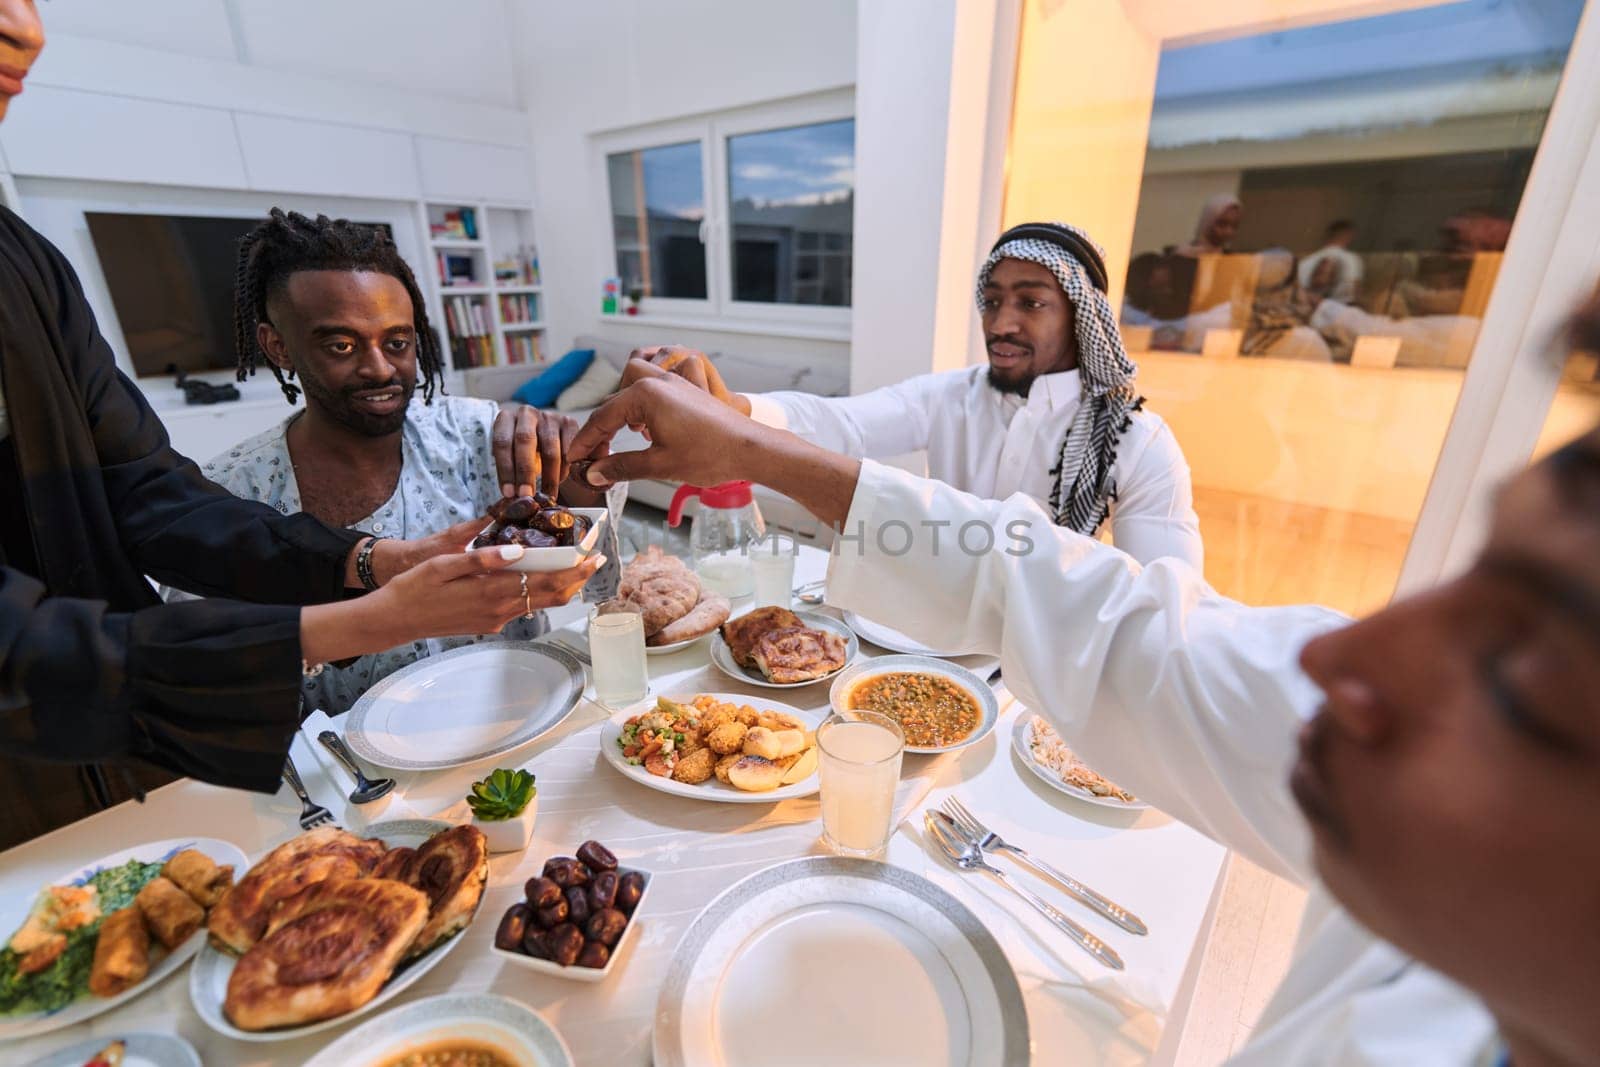 In a poignant close-up, the diverse hands of a Muslim family delicately grasp fresh dates, symbolizing the breaking of the fast during the holy month of Ramadan, capturing a moment of cultural unity, shared tradition, and the joyous anticipation of communal iftar.